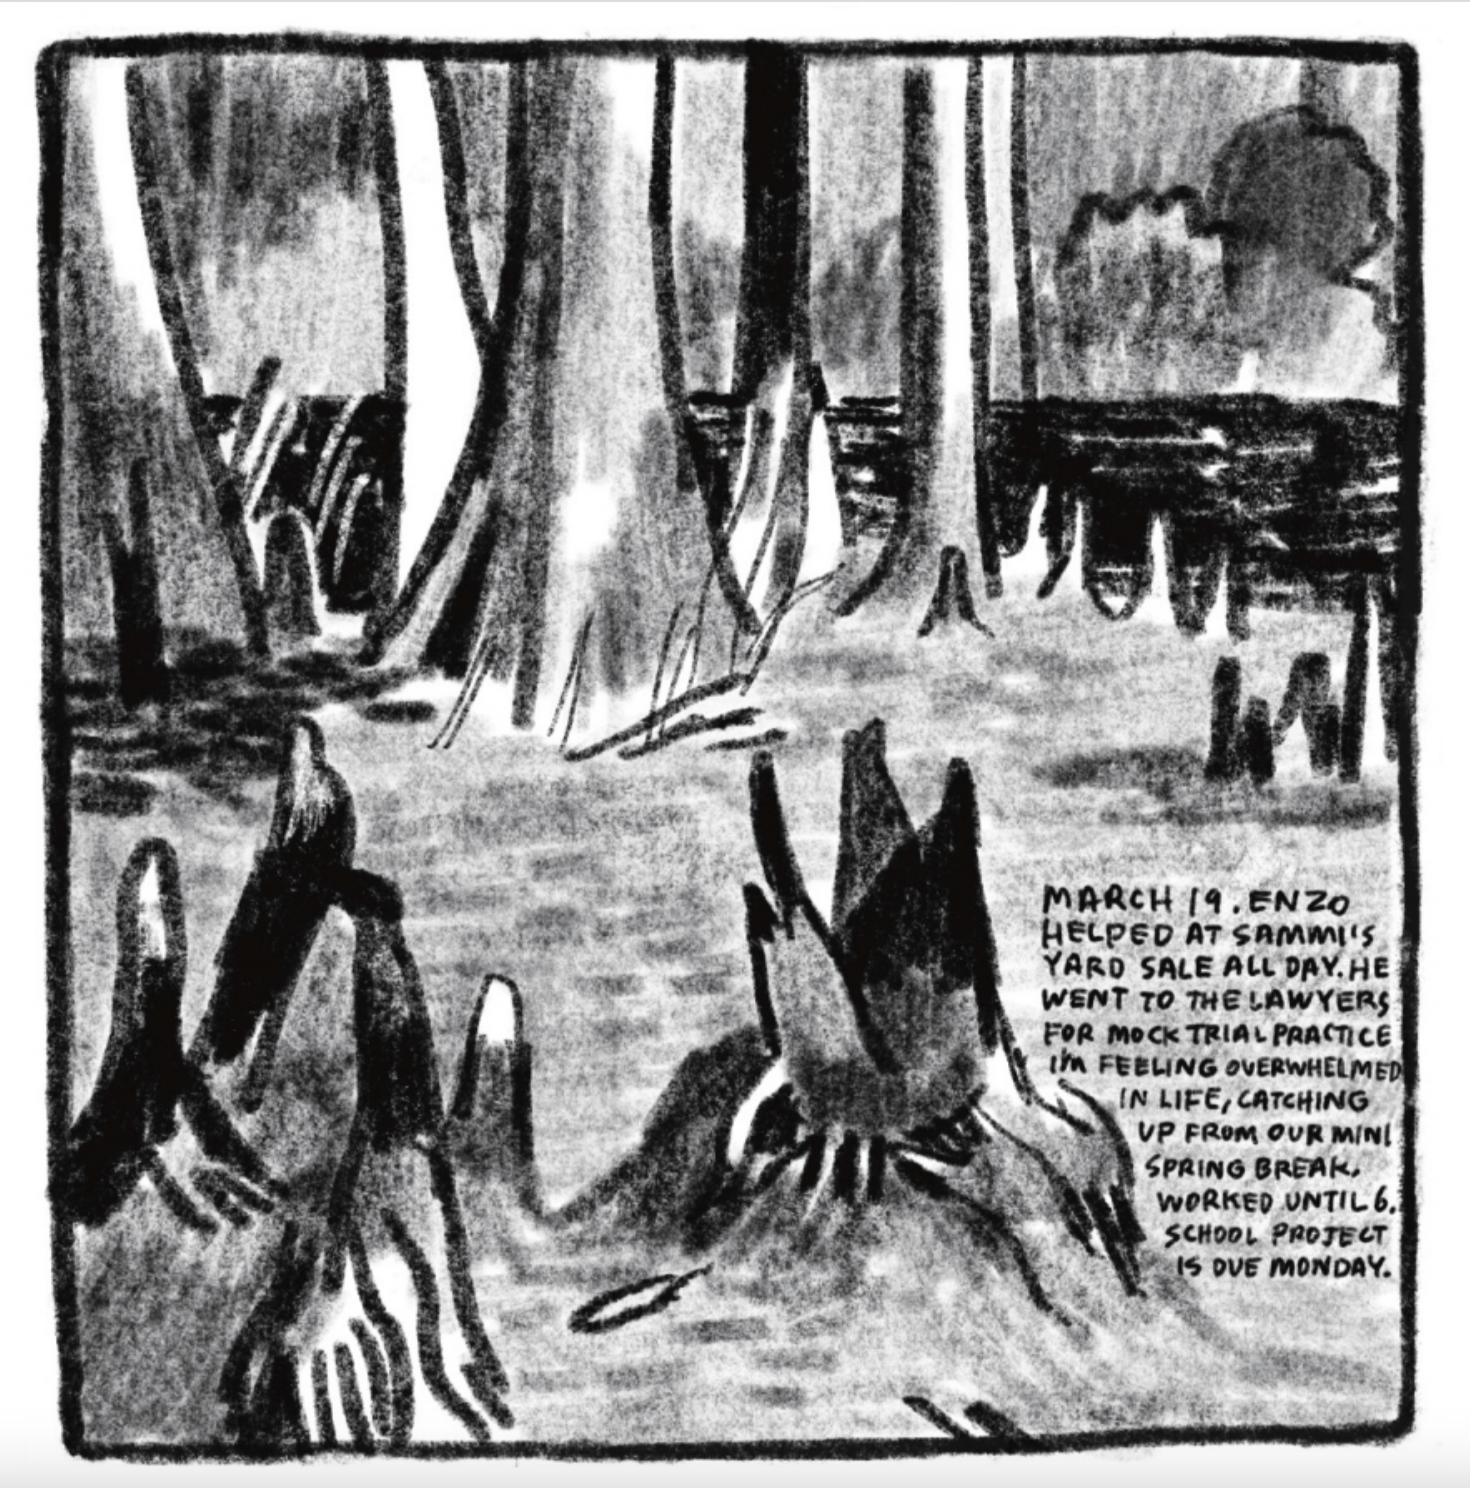 A landscape view of cypress trees in a swamp.
Description reads: "March 19. Enzo helped at Sammi's yard sale all day. He went to the lawyers for mock trial practice. I'm feeling overwhelmed in life, catching up from our mini spring break. Worked until 6. School project is due Monday."